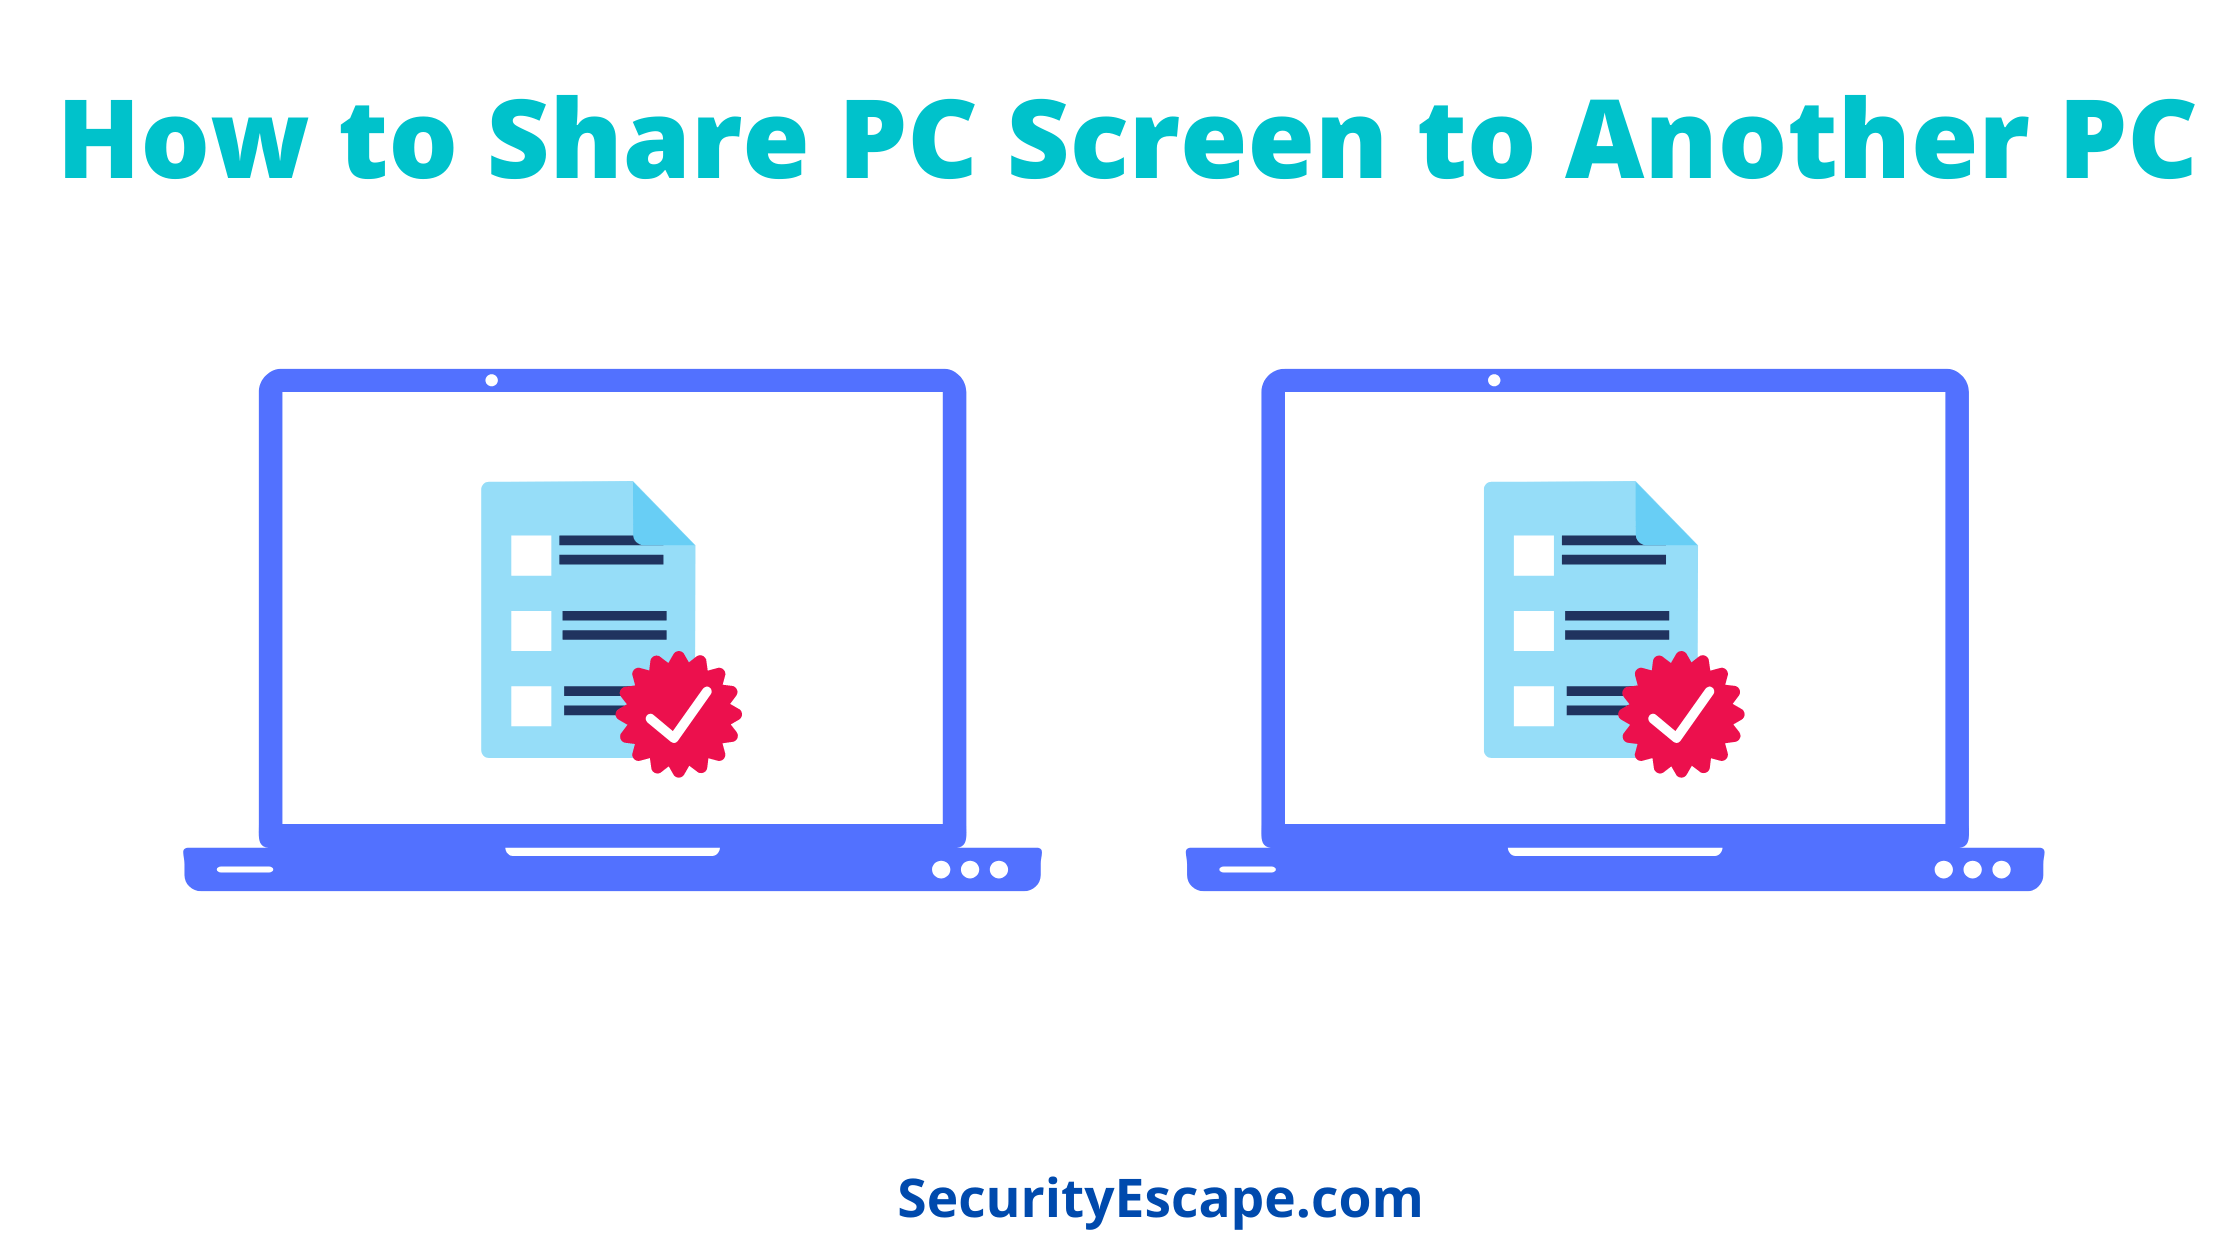 How to Share PC Screen to another PC